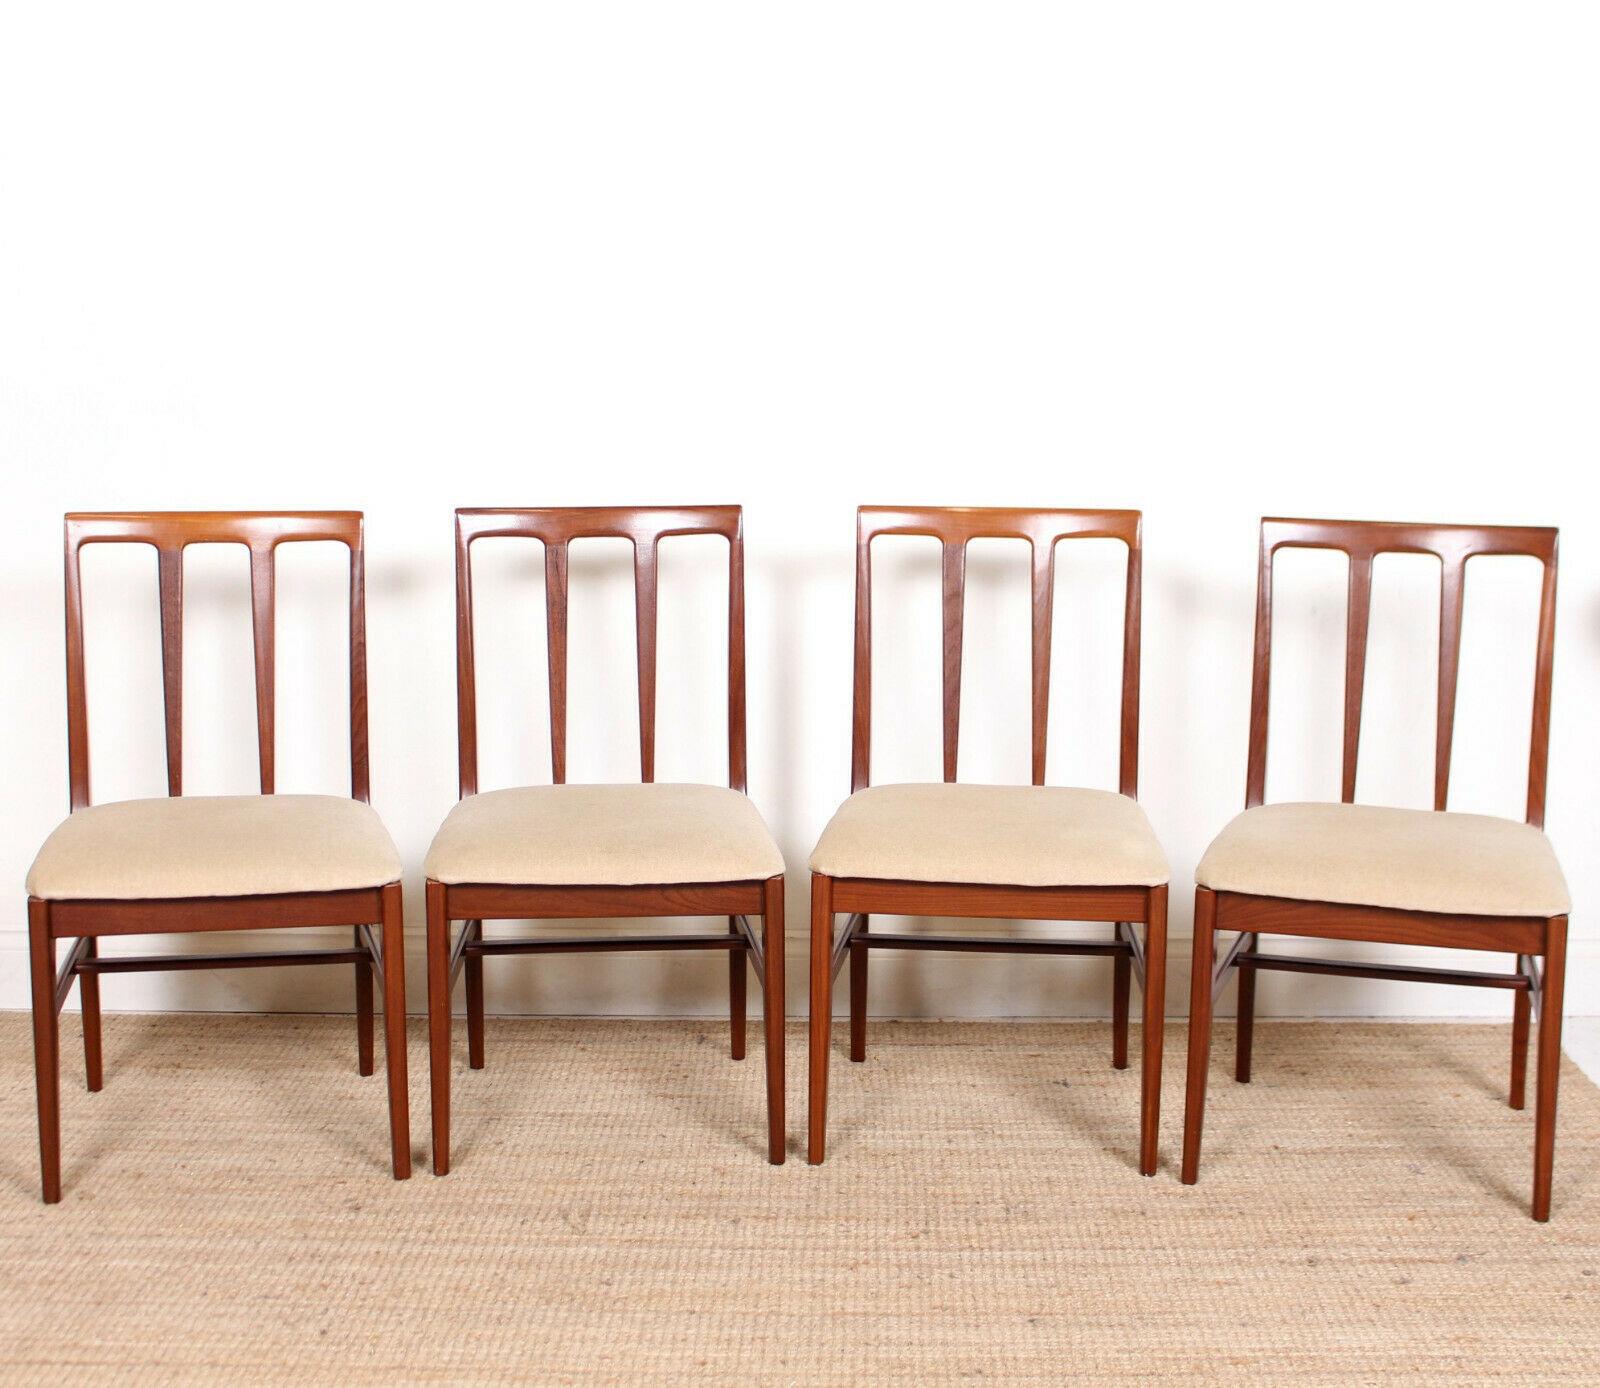 Danish Teak Dining Table and Chairs Mid-Century Modern 4 Chairs 3